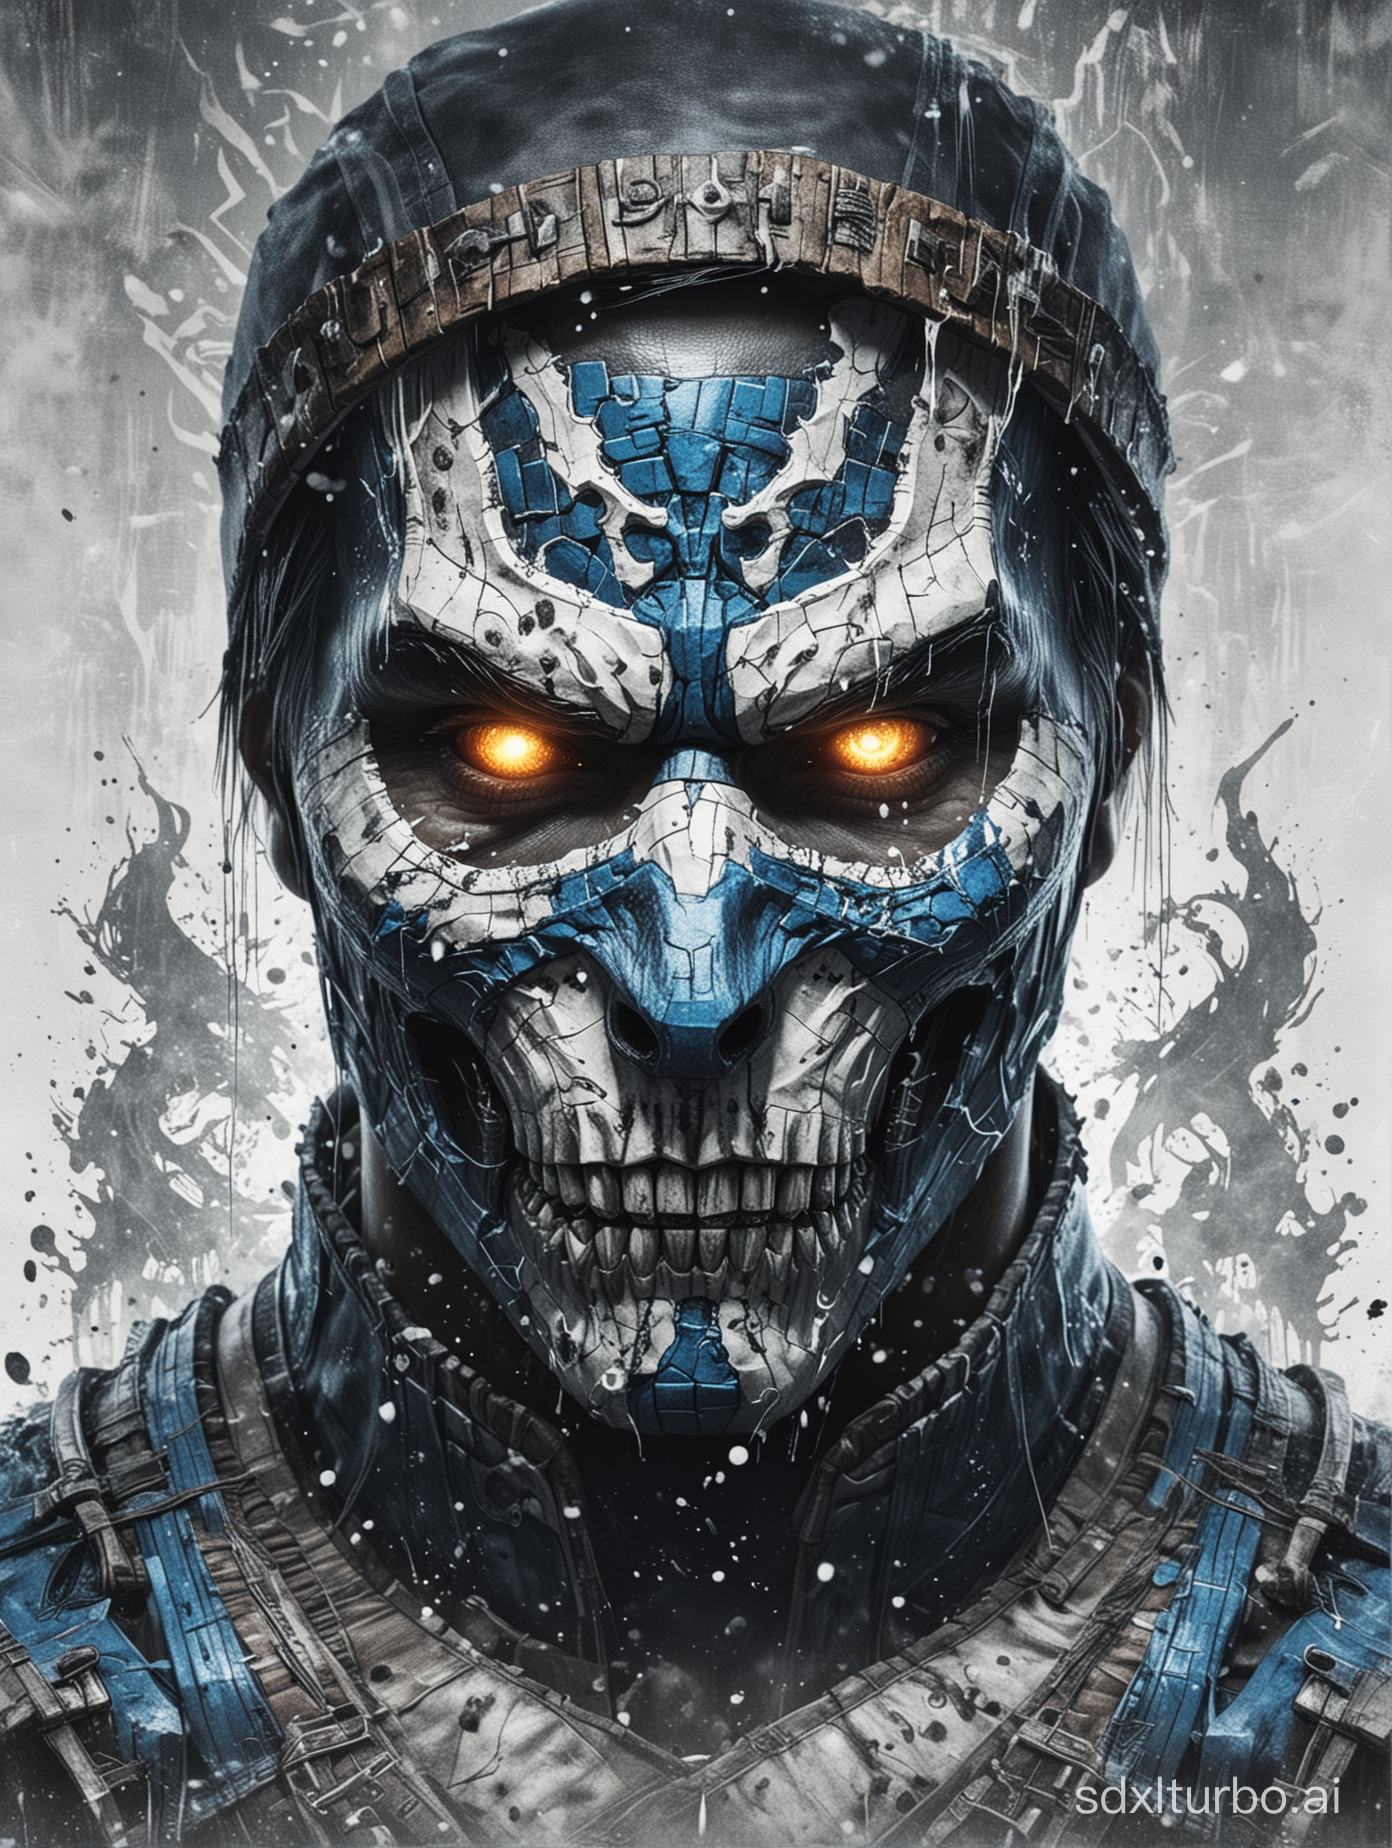 Sub Zero from Mortal Kombat, skull face, cold white dull lifeless eyes, very scary character, close-up, ink artistic conception, with typography elements, abstract, complementary colors, mosaic of characters, wallpaper style, simplicity, Chinese painting, white background